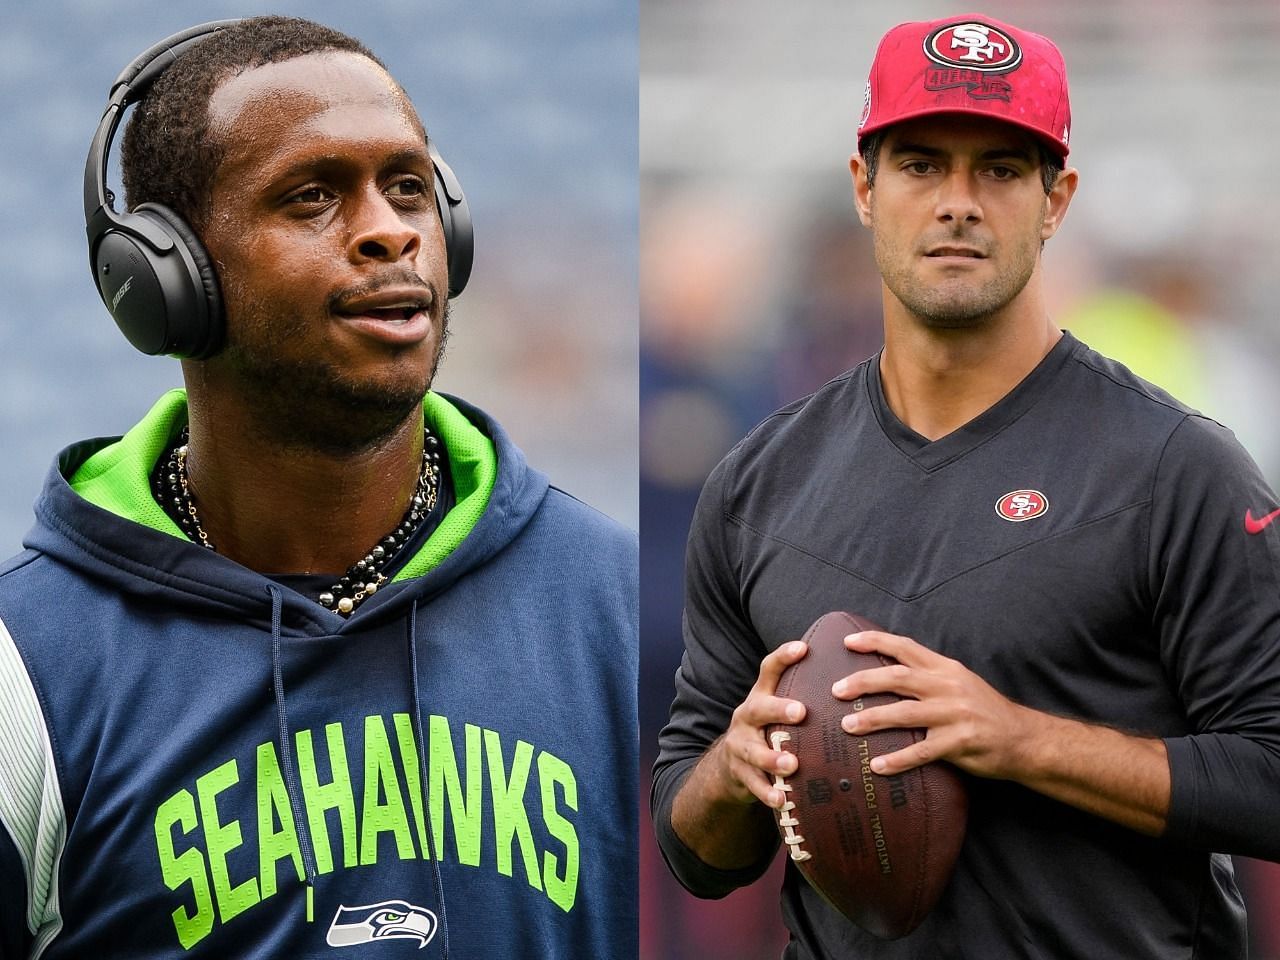 Geno Smith or Jimmy Garoppolo: Who is the better fantasy pick?